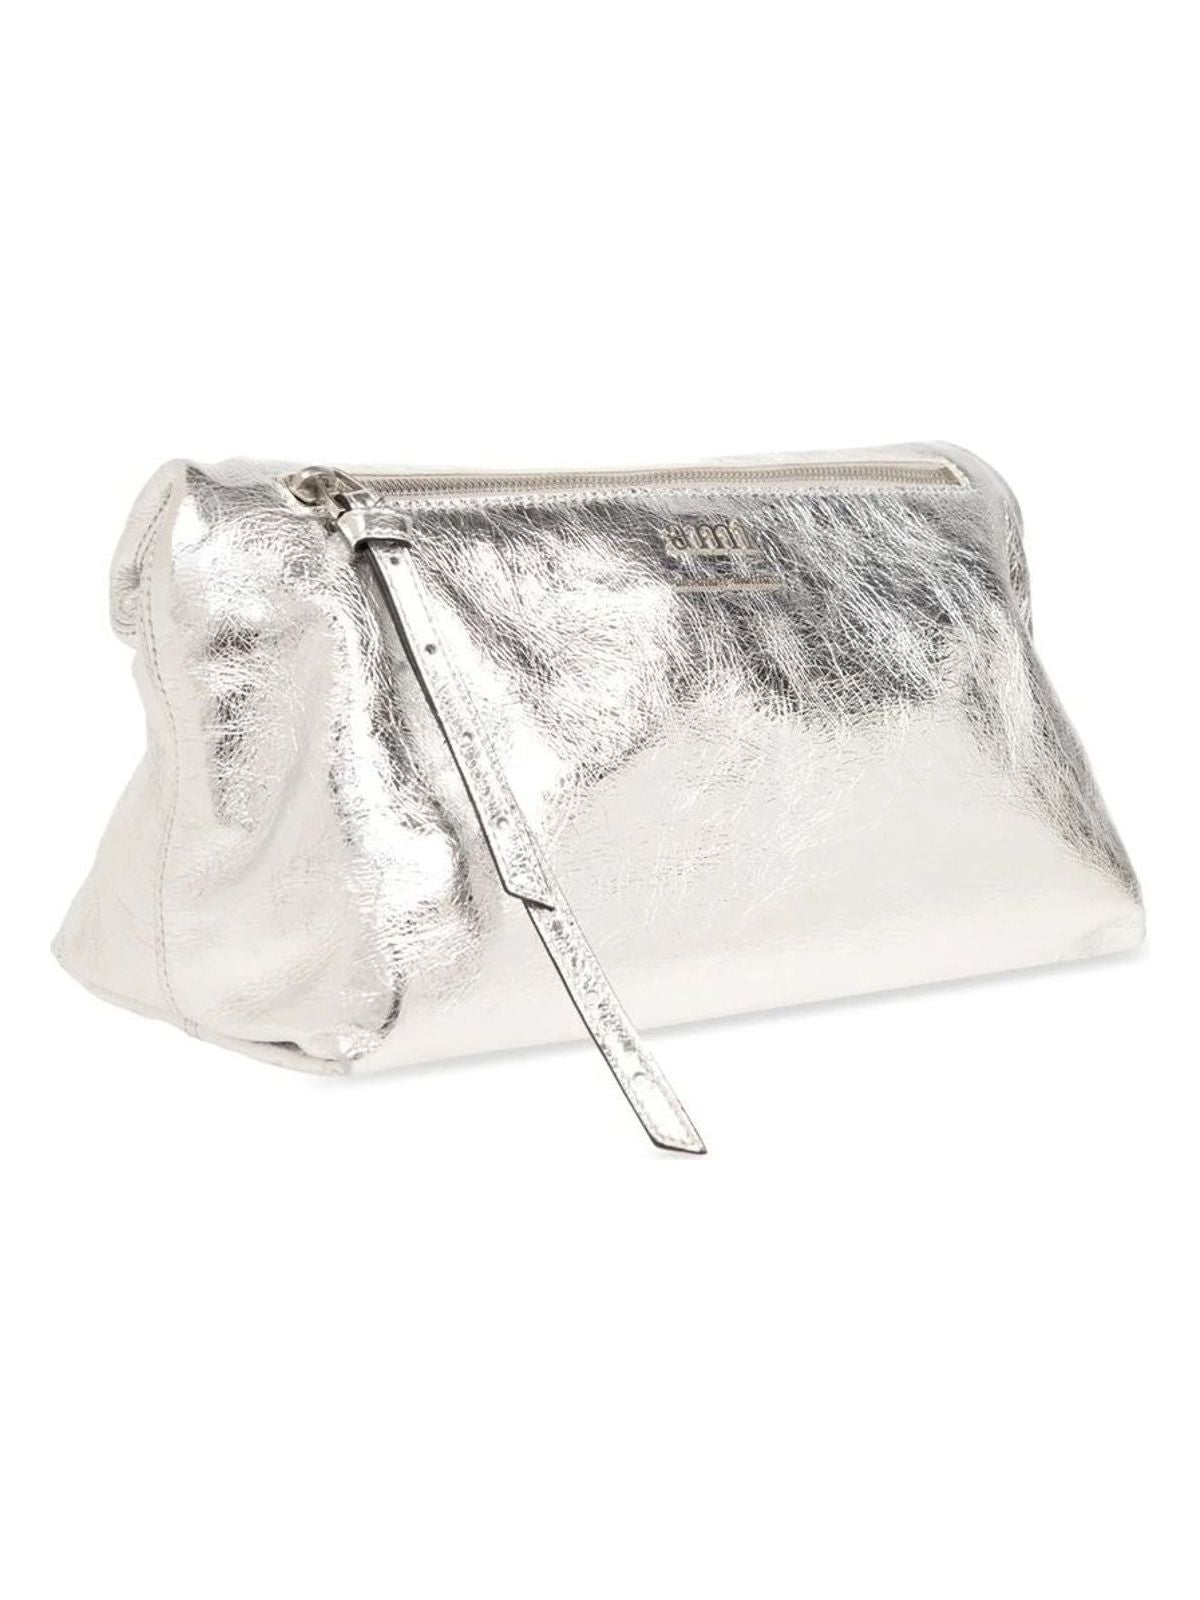 900 AMI PARIS PLATED GROCERY POUCH POCKET